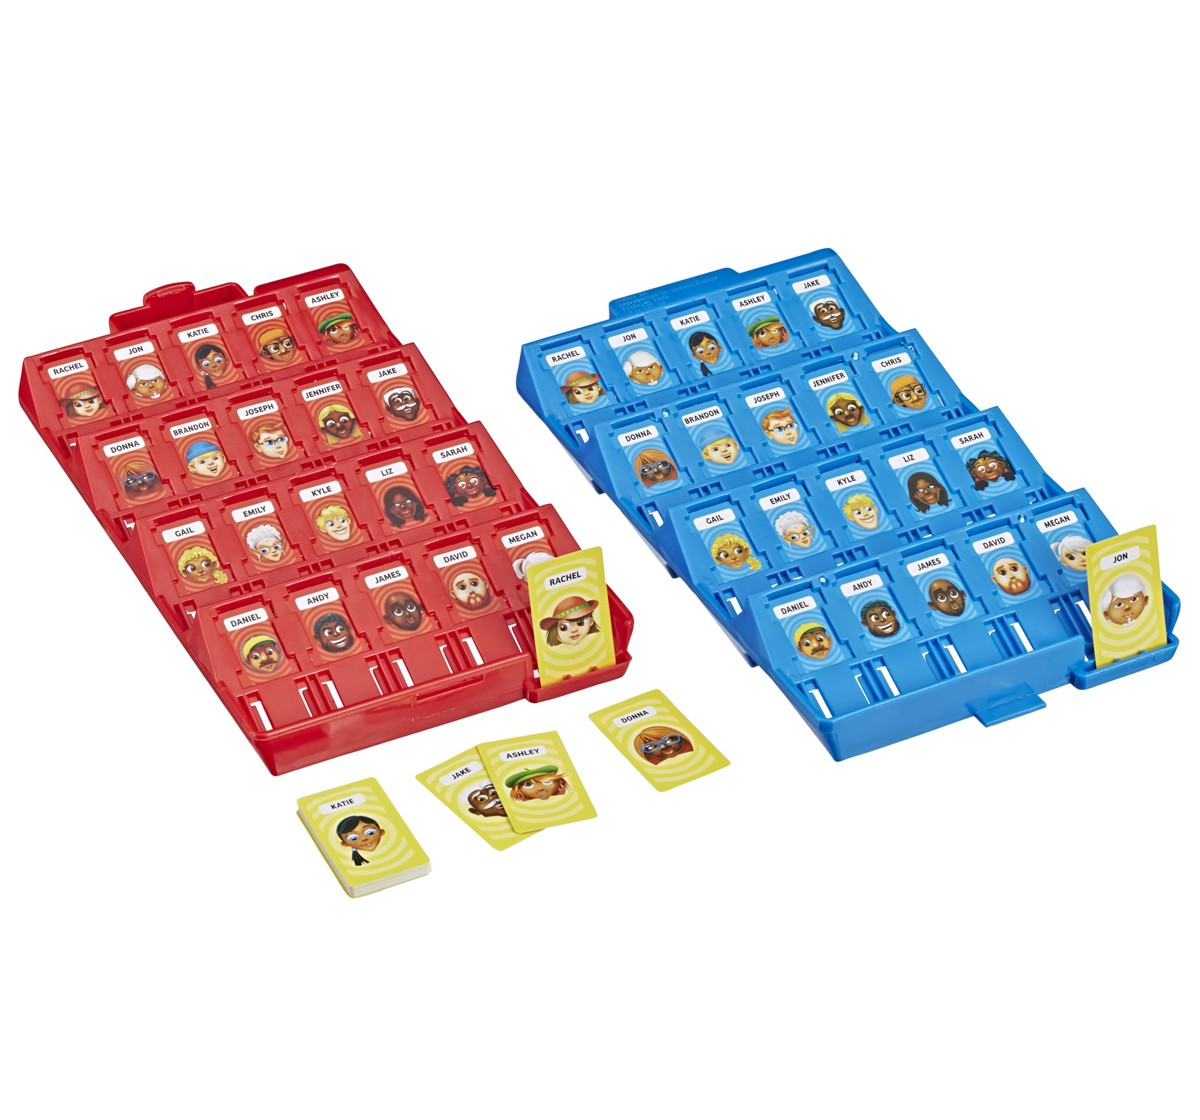 Hasbro Guess Who Grab and Go Game Multicolor 8Y+